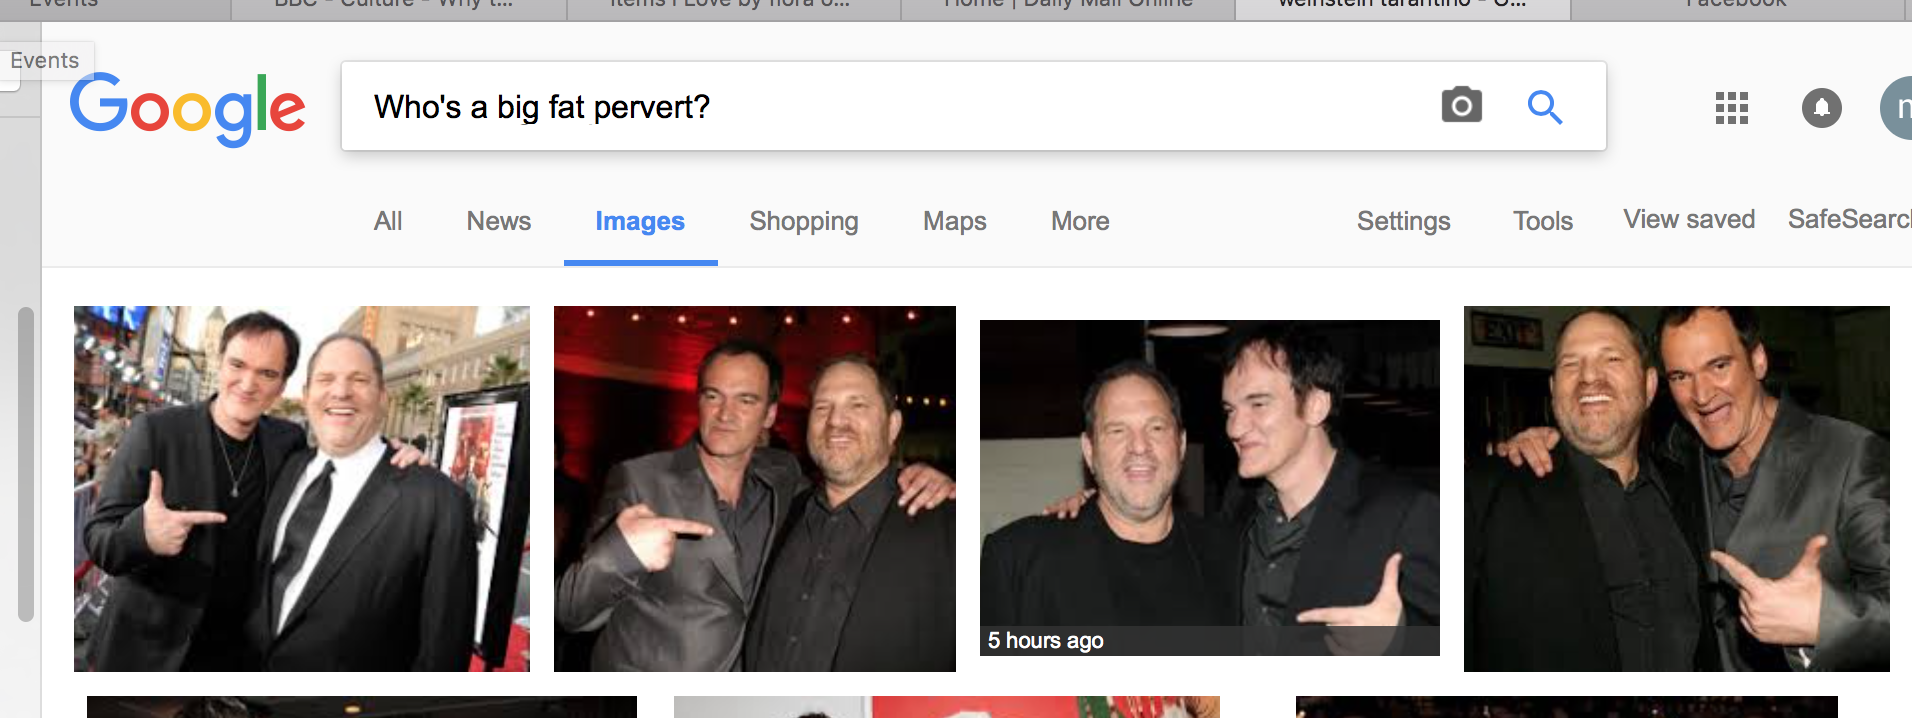 Google answers even the most difficult questions